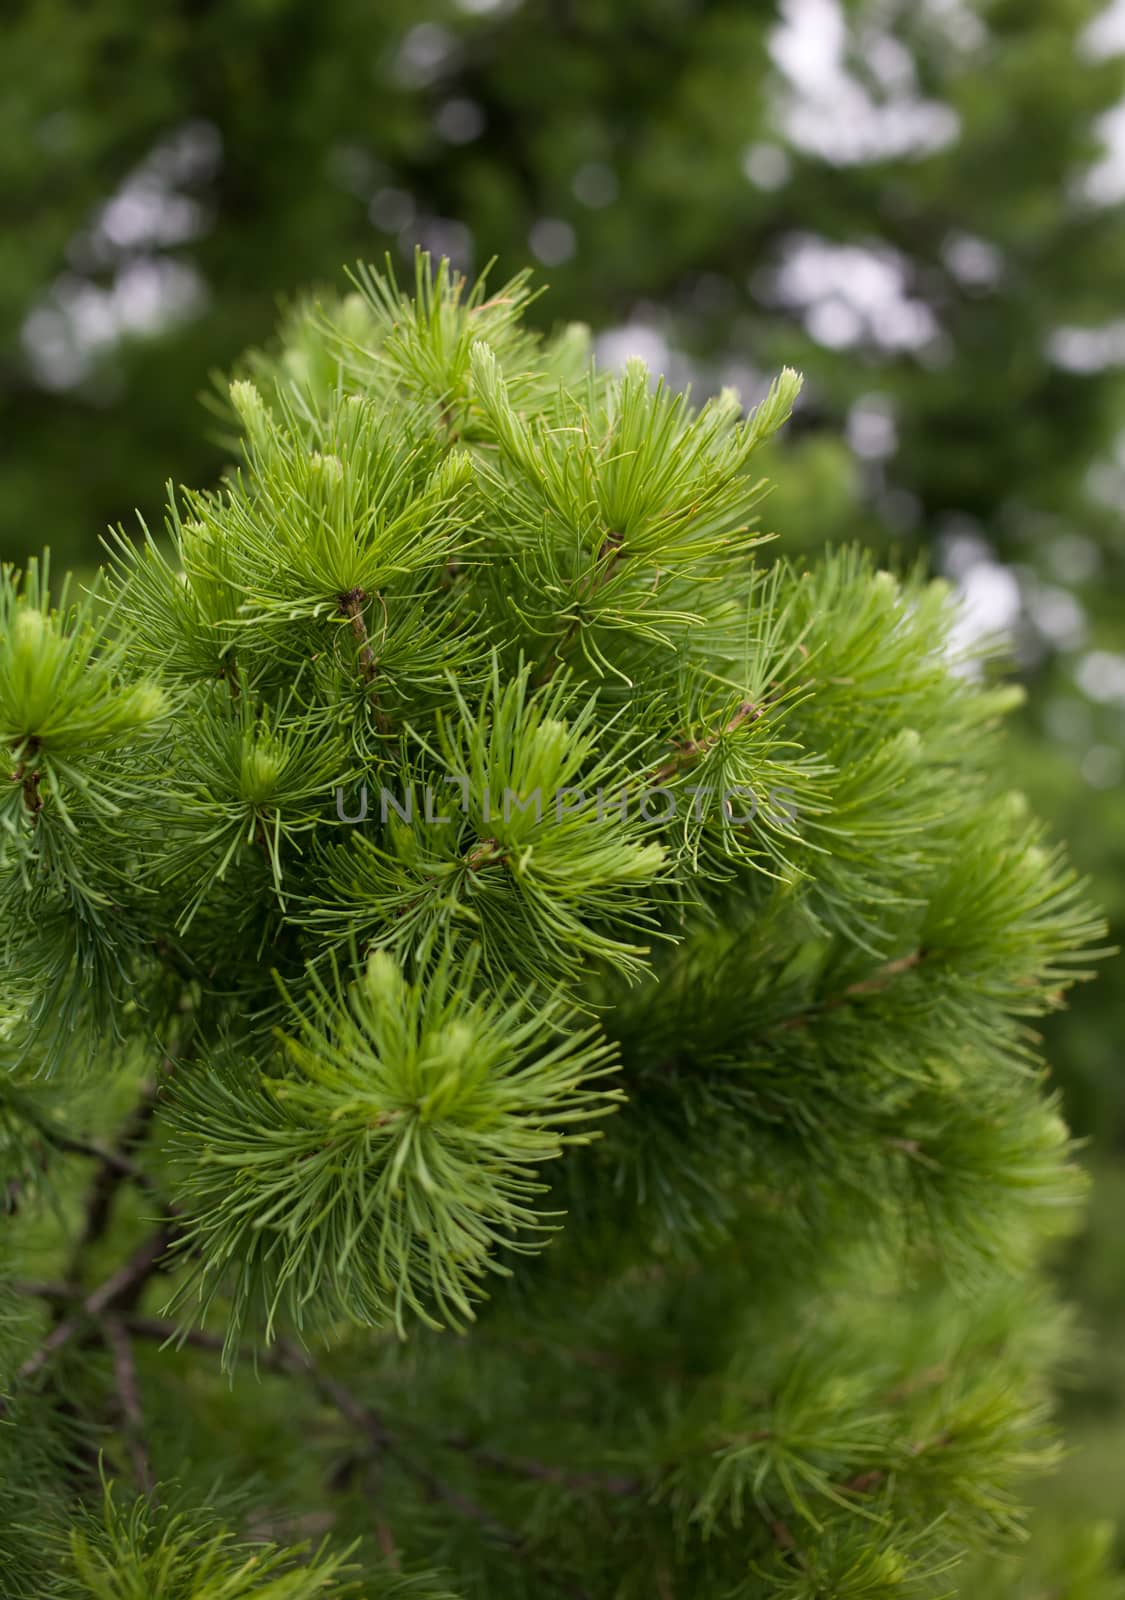 General view of the branches of pine tree needles with soft green with a blurred background